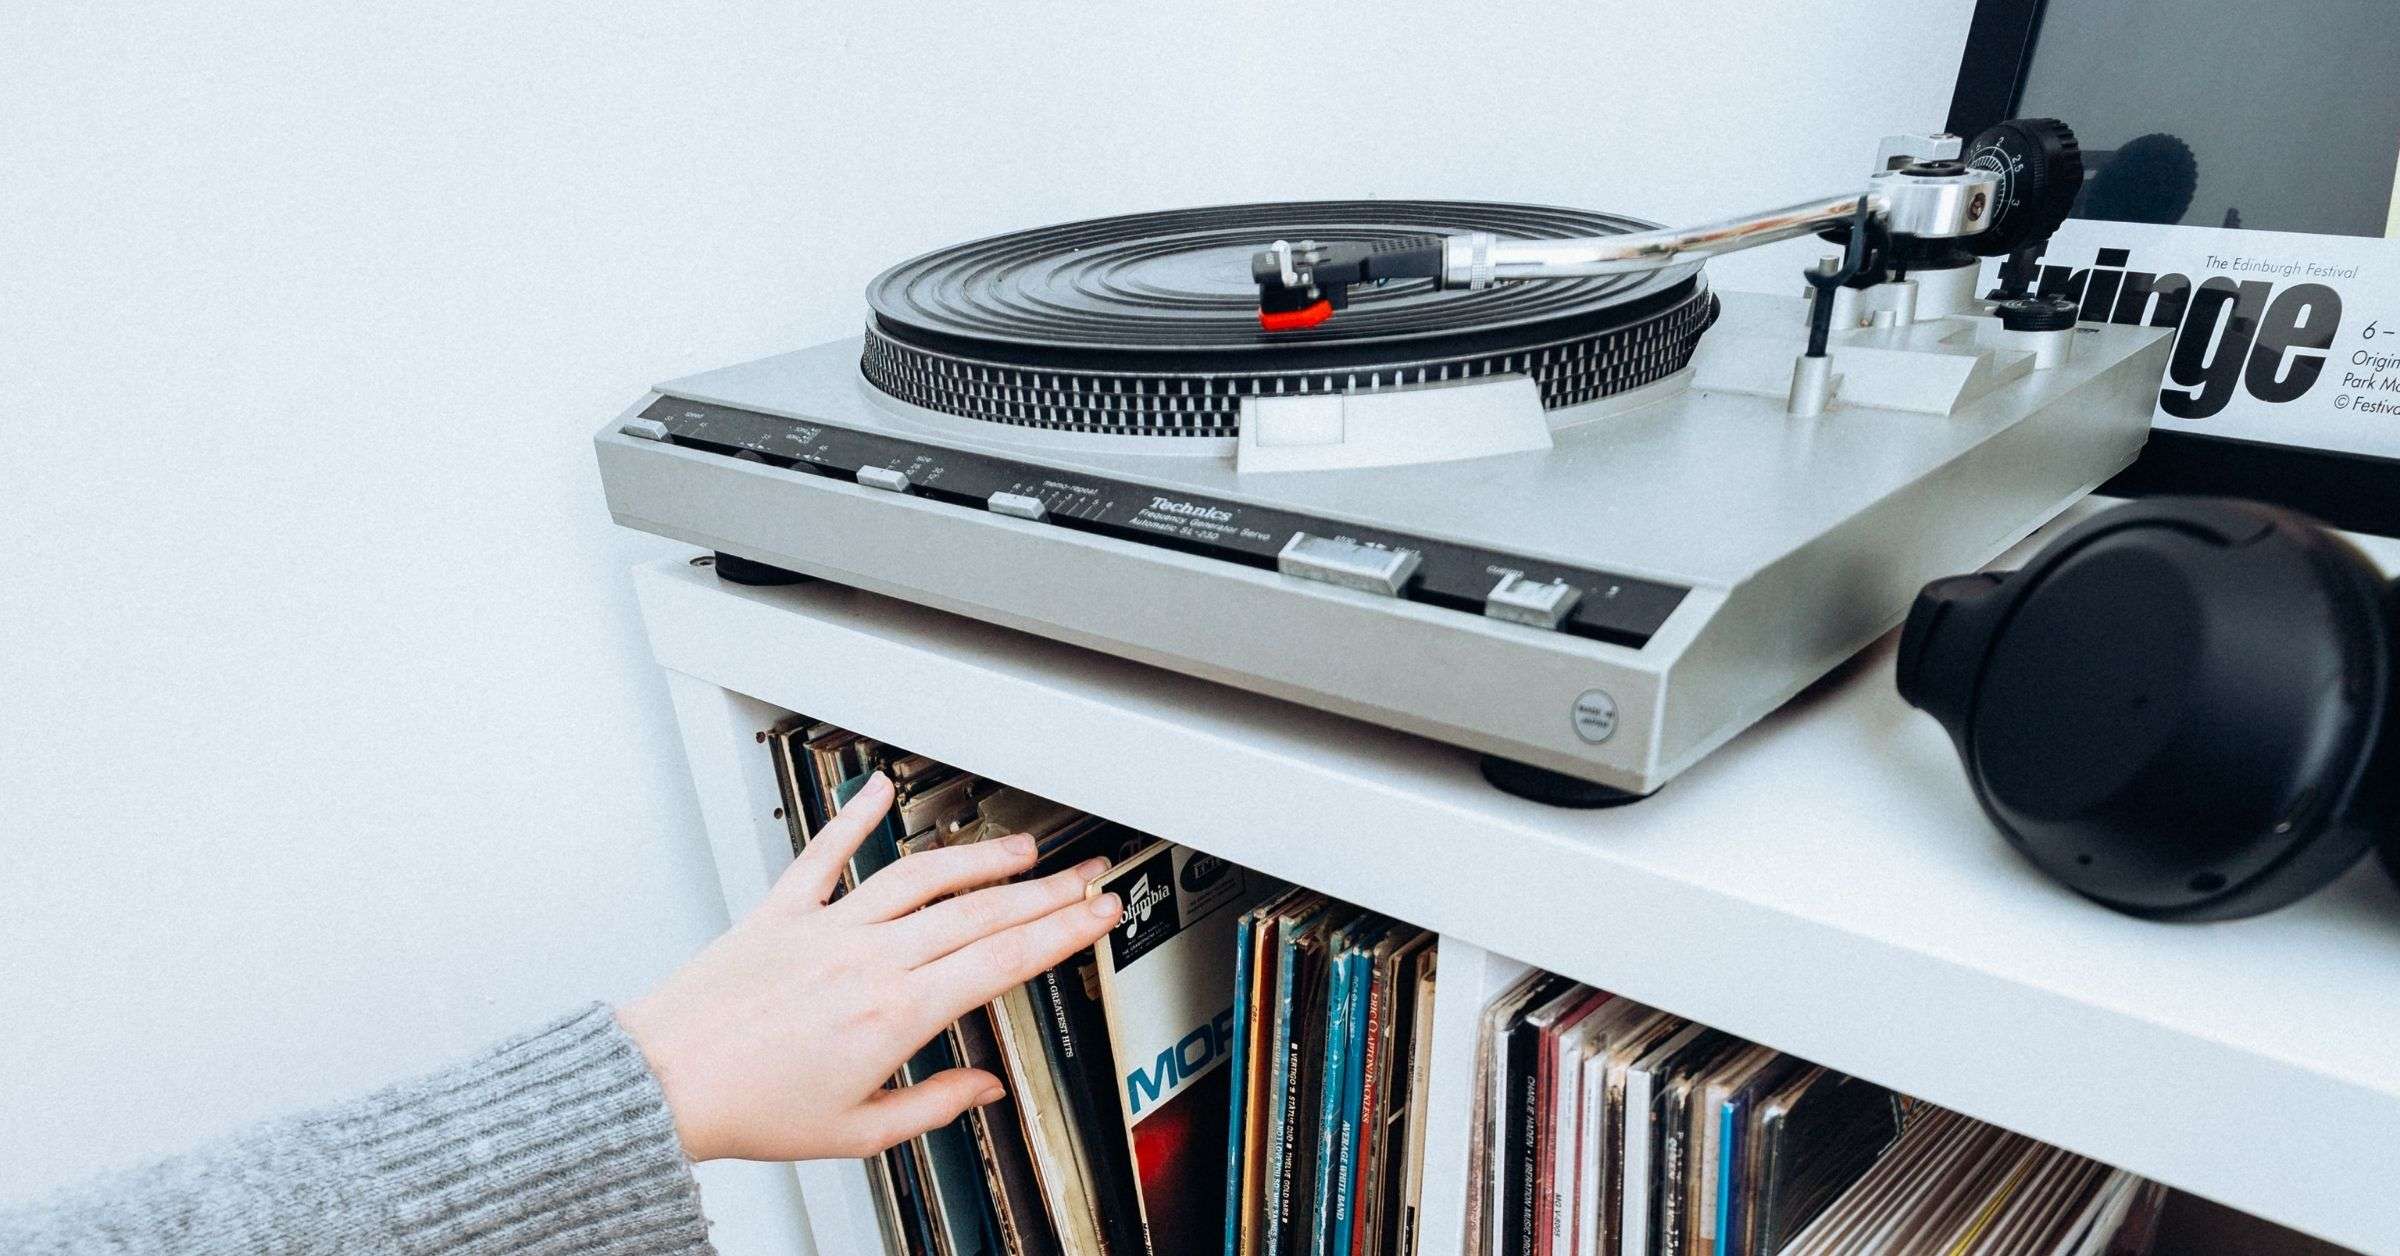 Manual vs. automatic turntables